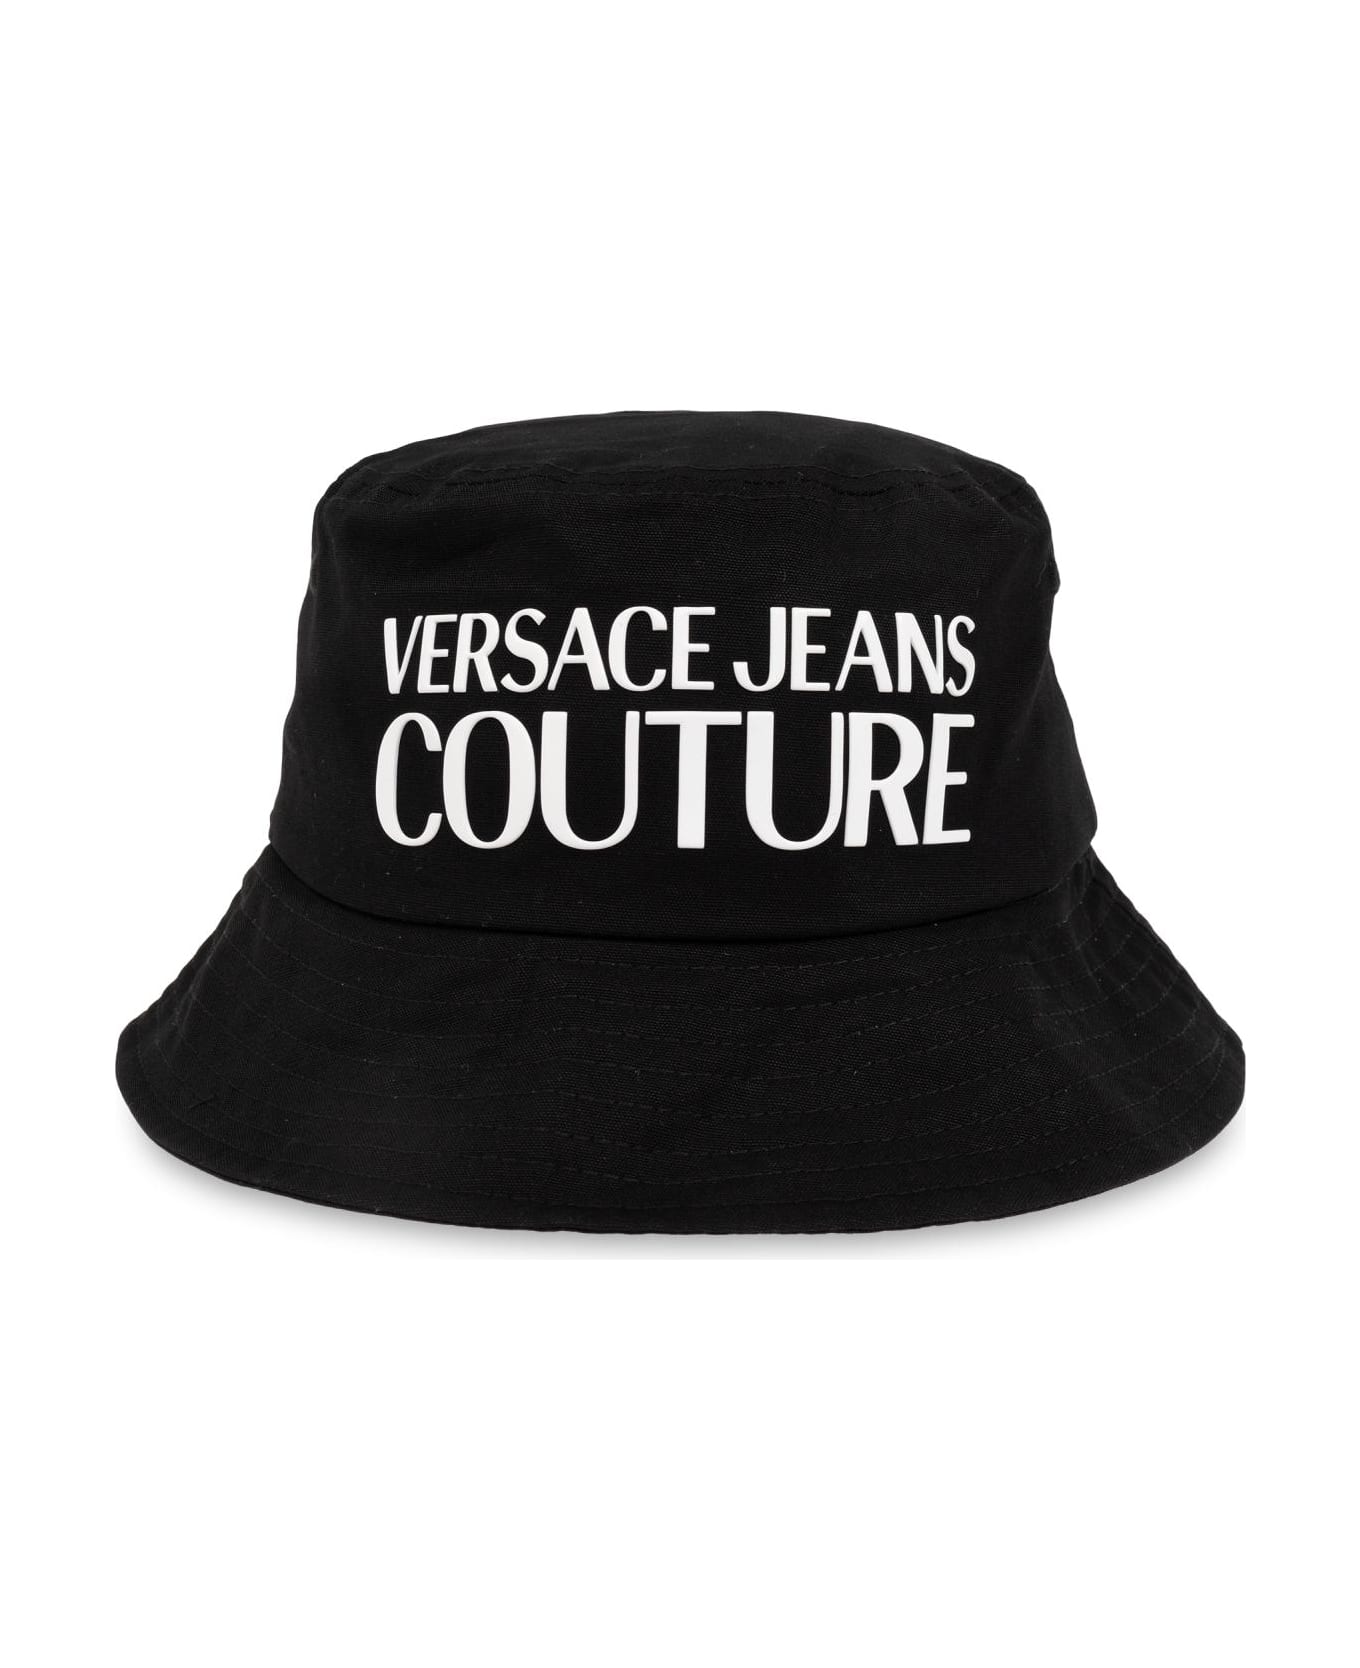 Versace Jeans Couture Bucket Hat With Logo - Black 帽子